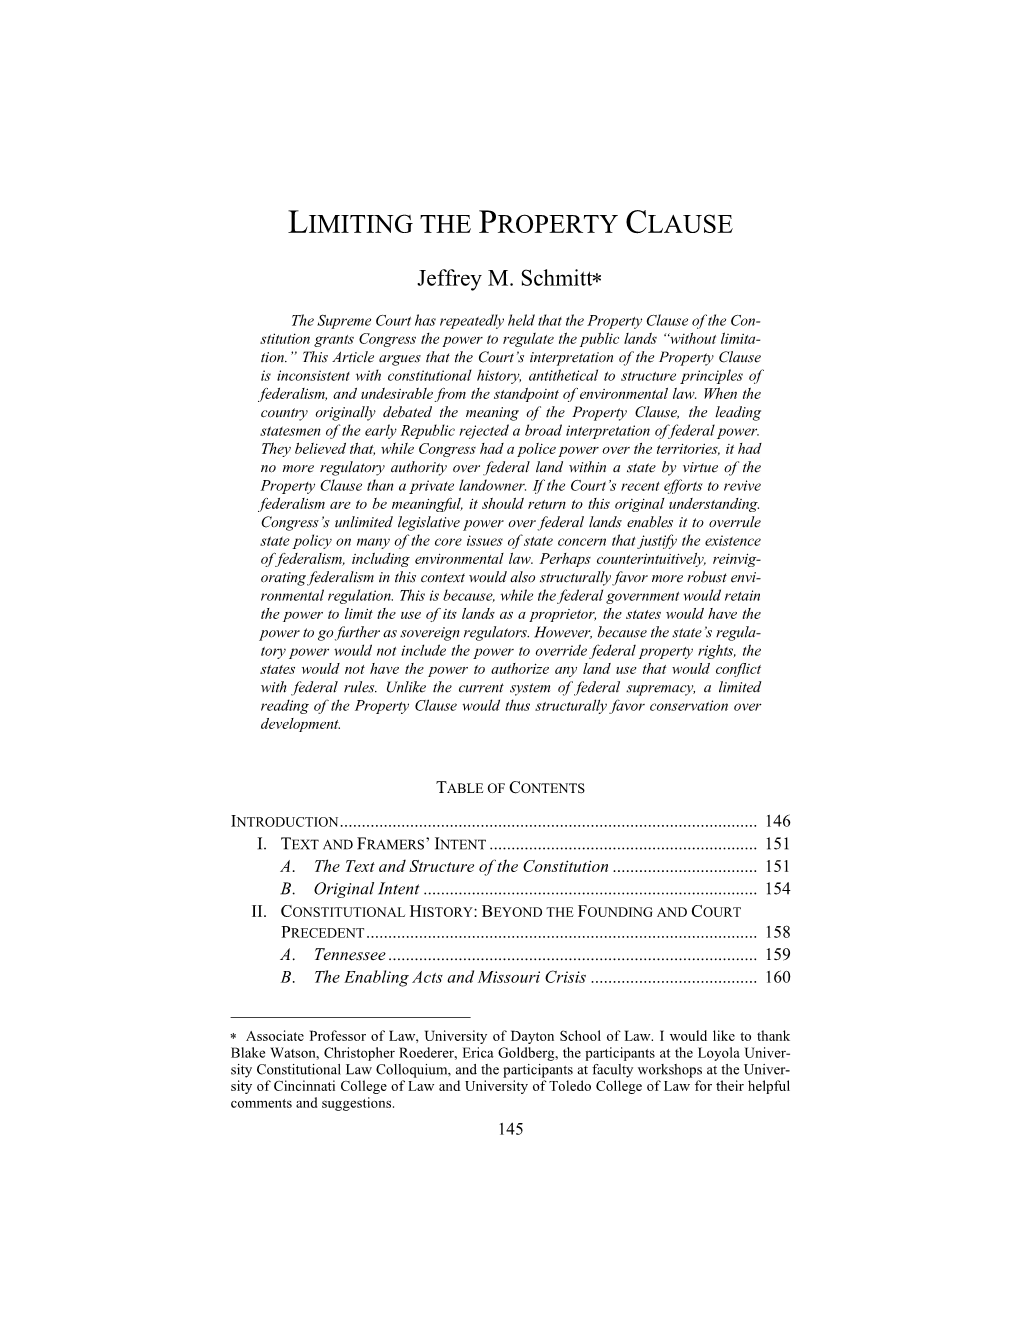 Limiting the Property Clause